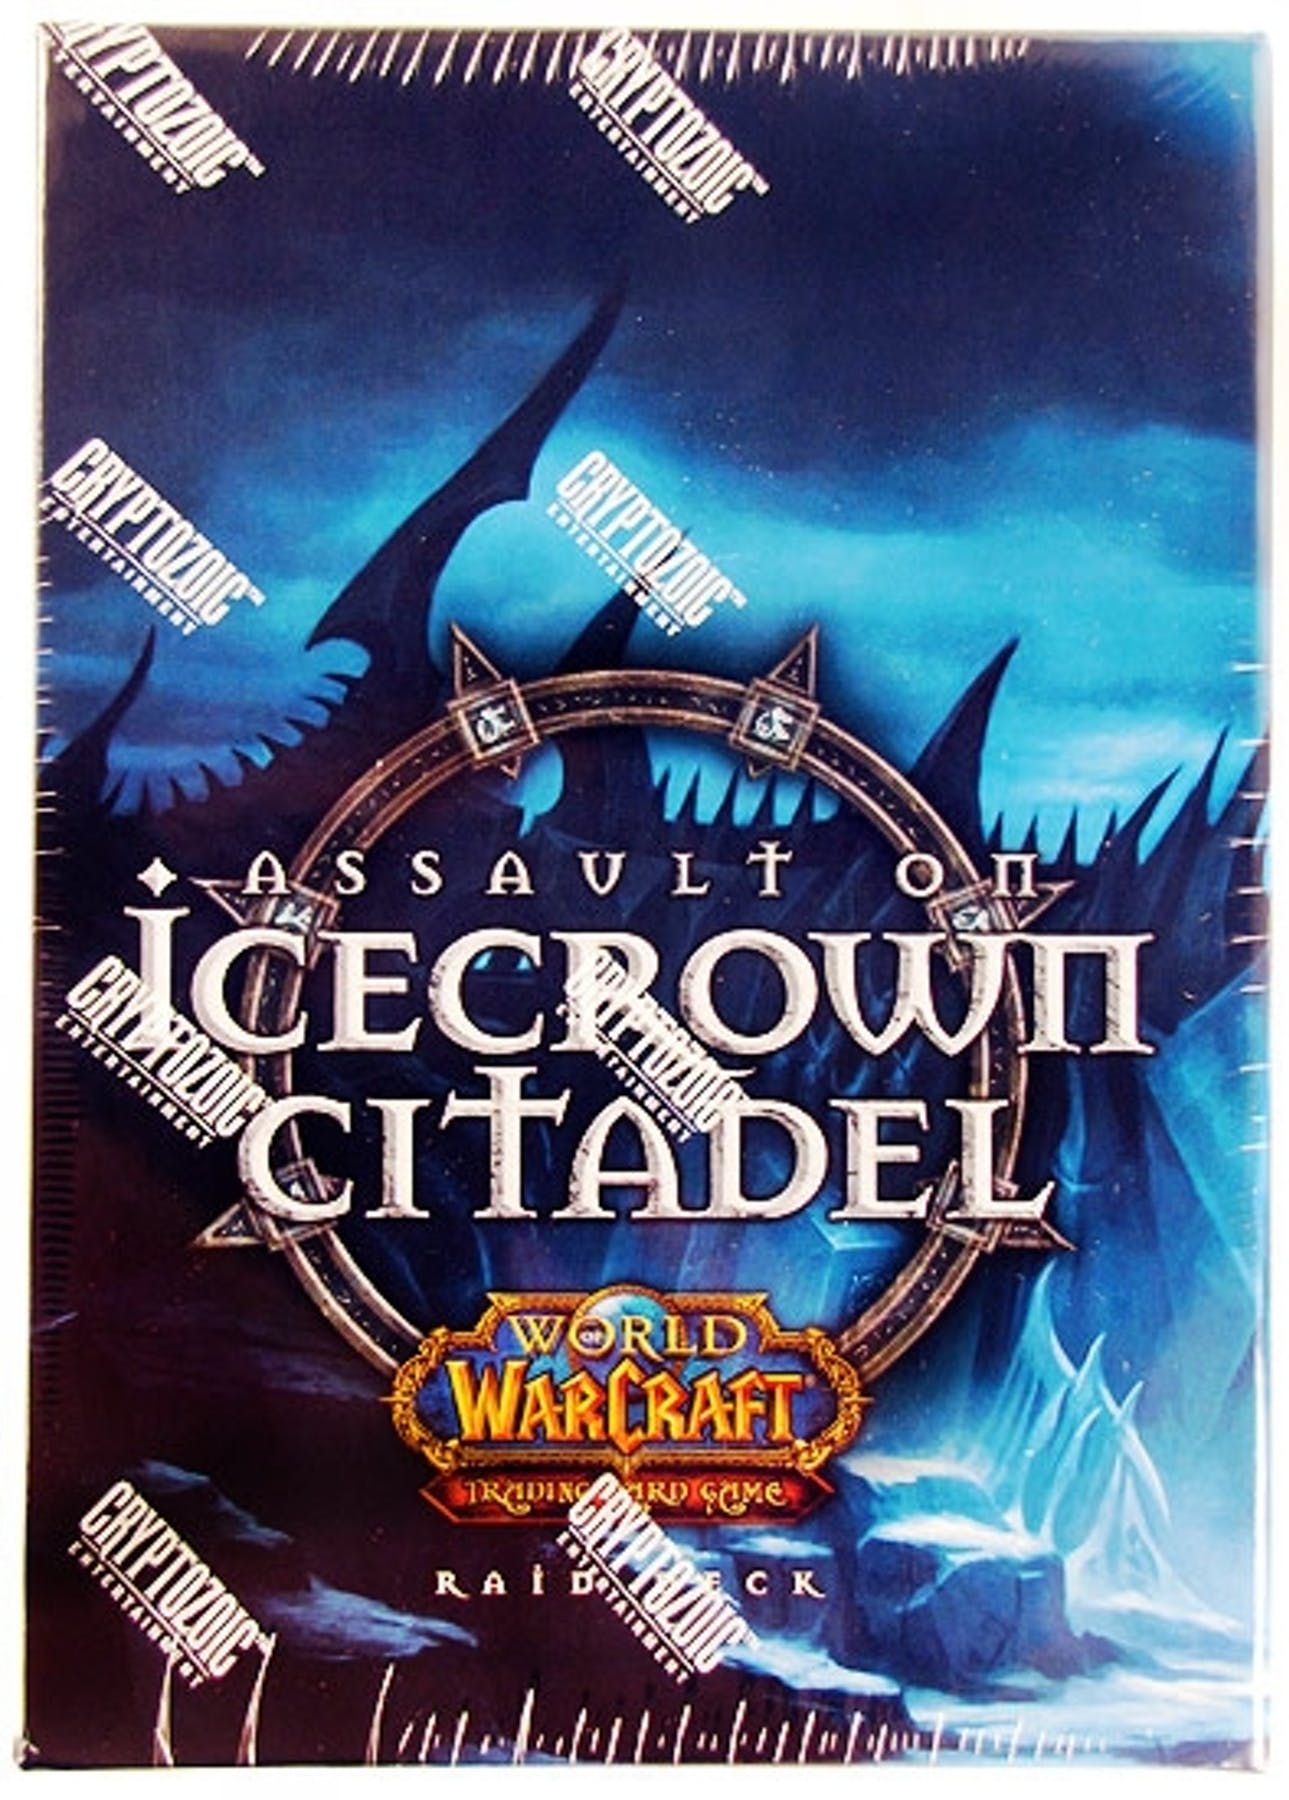 World of Warcraft Trading Card Game: Assault on Icecrown Citadel